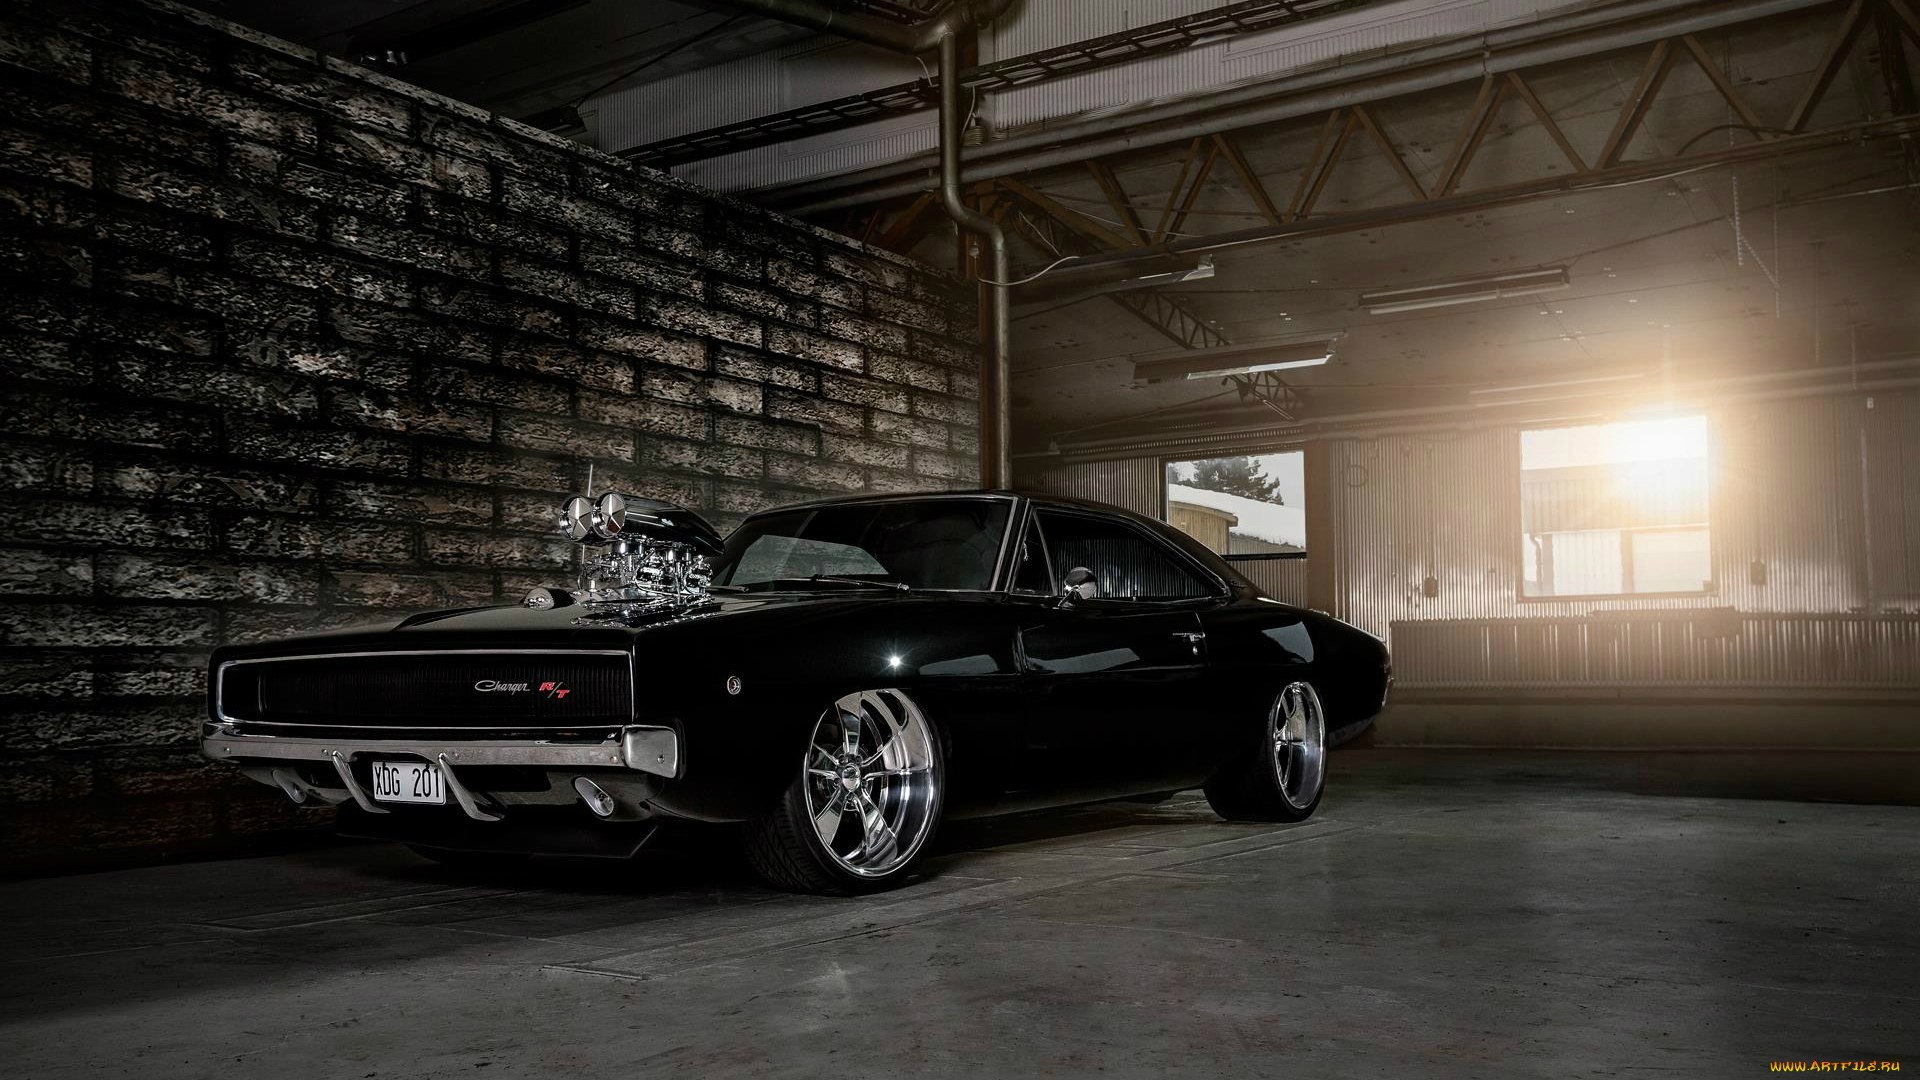 Dodge Charger Muscle Cars Hot Rod Engine Wallpaper Background